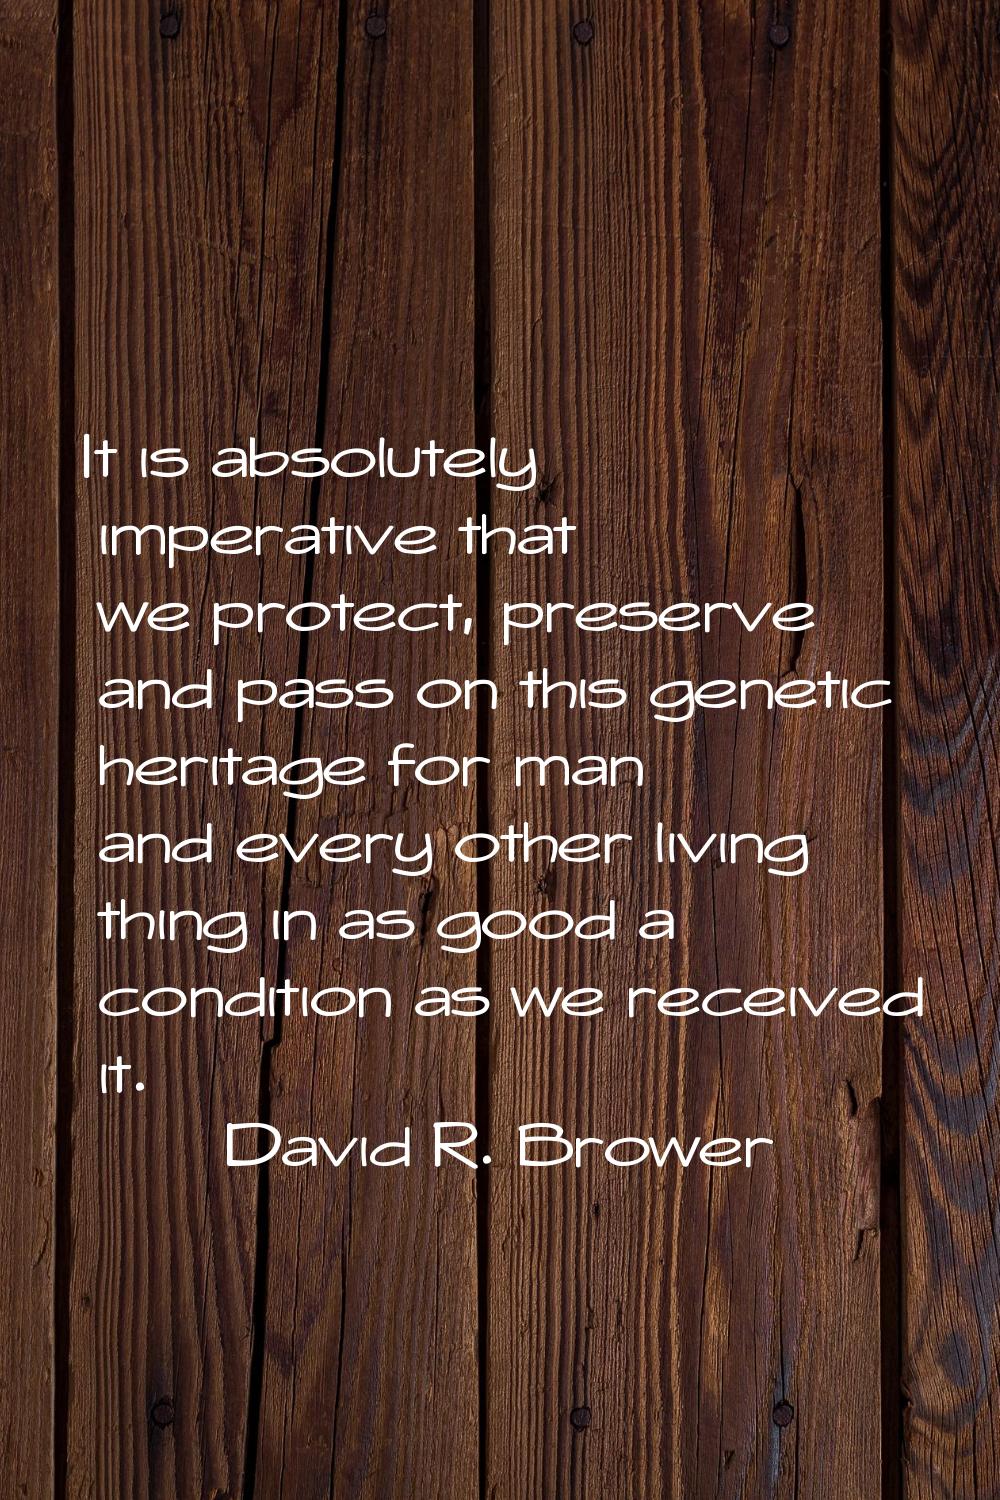 It is absolutely imperative that we protect, preserve and pass on this genetic heritage for man and